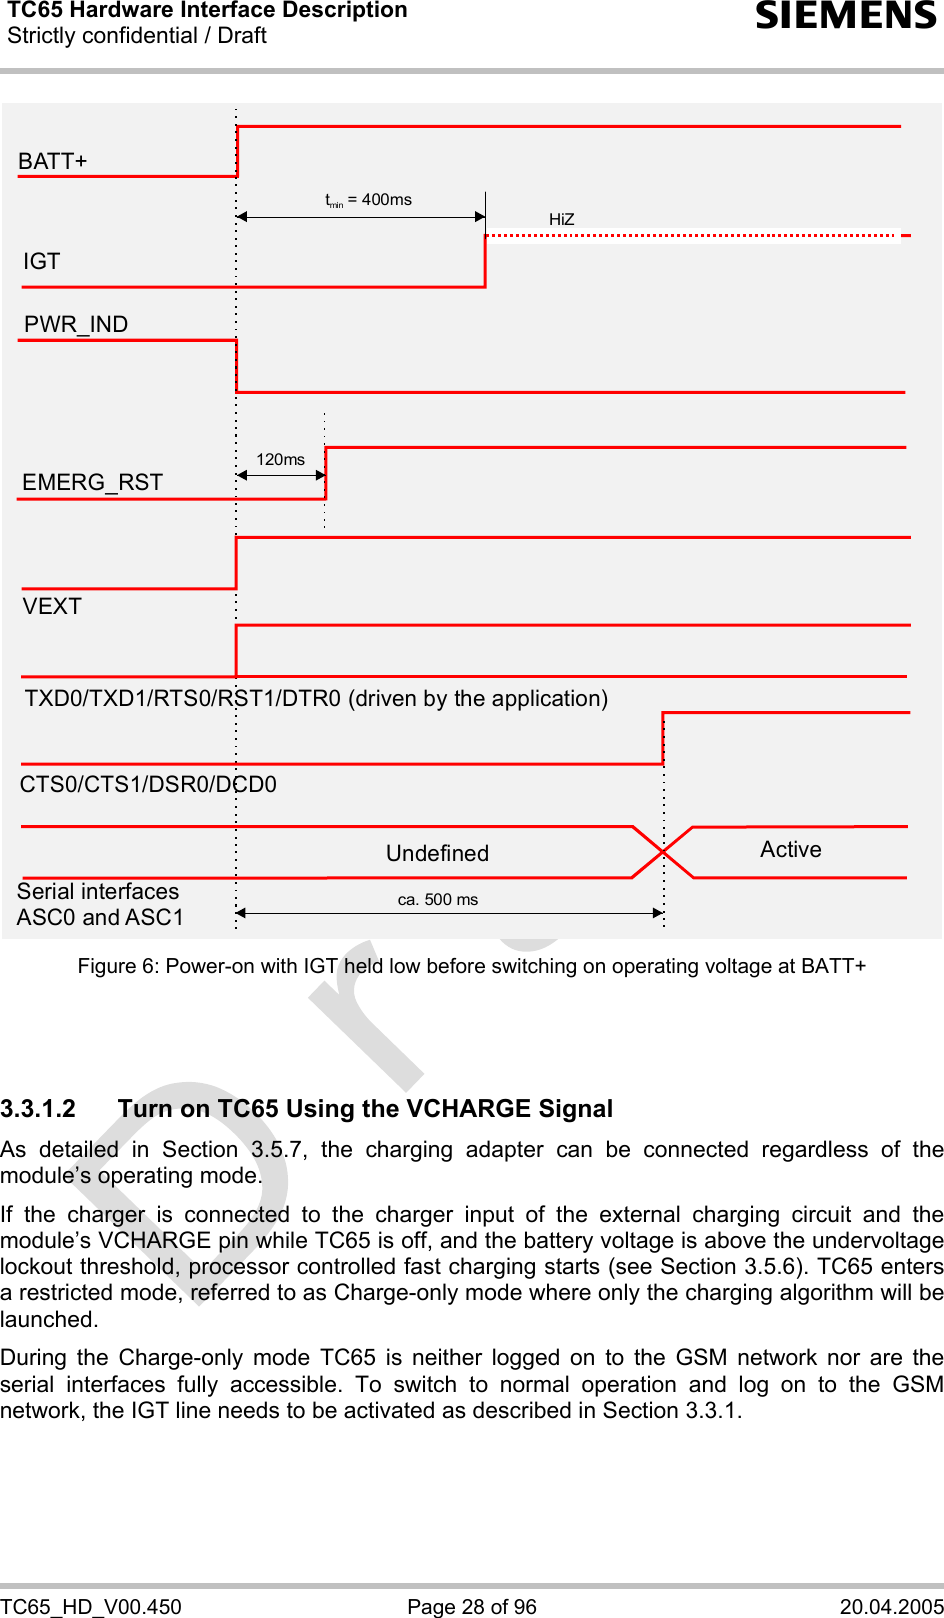 TC65 Hardware Interface Description Strictly confidential / Draft  s TC65_HD_V00.450  Page 28 of 96  20.04.2005 EMERG_RSTPWR_INDt  = 400msmin120msBATT+IGTHiZVEXTTXD0/TXD1/RTS0/RST1/DTR0 (driven by the application)CTS0/CTS1/DSR0/DCD0ca. 500 msSerial interfacesASC0 and ASC1Undefined Active Figure 6: Power-on with IGT held low before switching on operating voltage at BATT+    3.3.1.2  Turn on TC65 Using the VCHARGE Signal As detailed in Section 3.5.7, the charging adapter can be connected regardless of the module’s operating mode. If the charger is connected to the charger input of the external charging circuit and the module’s VCHARGE pin while TC65 is off, and the battery voltage is above the undervoltage lockout threshold, processor controlled fast charging starts (see Section 3.5.6). TC65 enters a restricted mode, referred to as Charge-only mode where only the charging algorithm will be launched. During the Charge-only mode TC65 is neither logged on to the GSM network nor are the serial interfaces fully accessible. To switch to normal operation and log on to the GSM network, the IGT line needs to be activated as described in Section 3.3.1.   